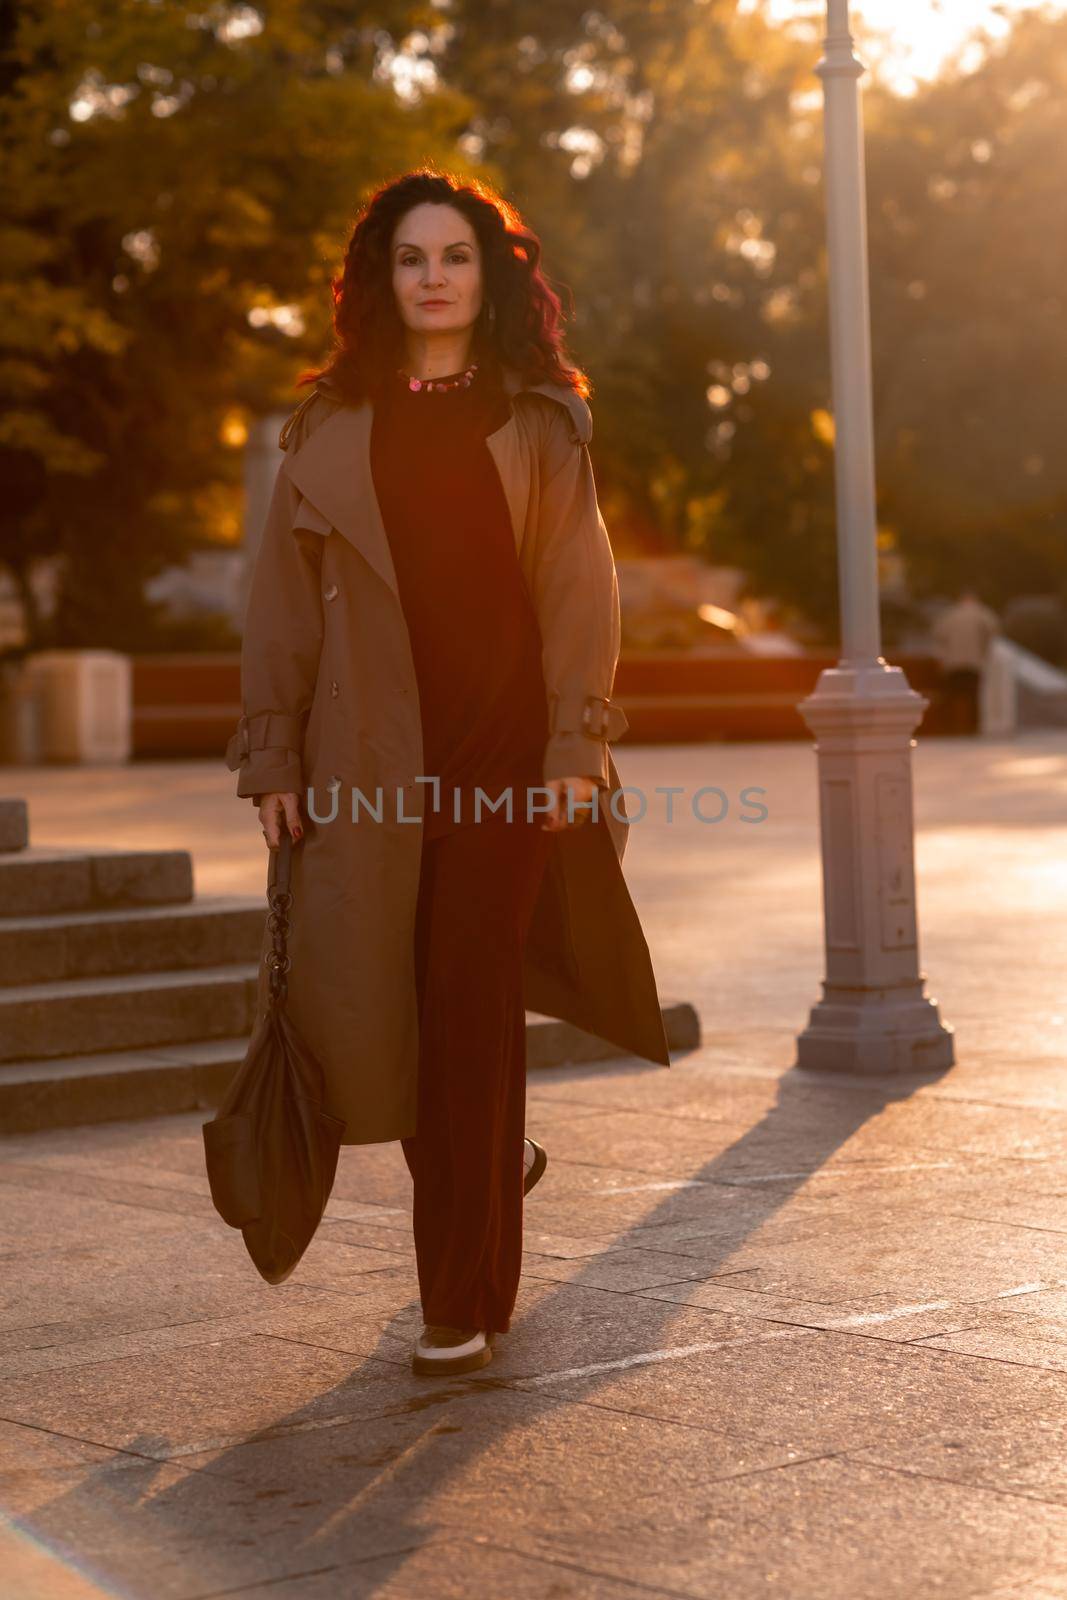 Outdoor fashion portrait of young elegant fashionable brunette woman, model in stylish hat, choker and light raincoat posing at sunset in European city. by Matiunina